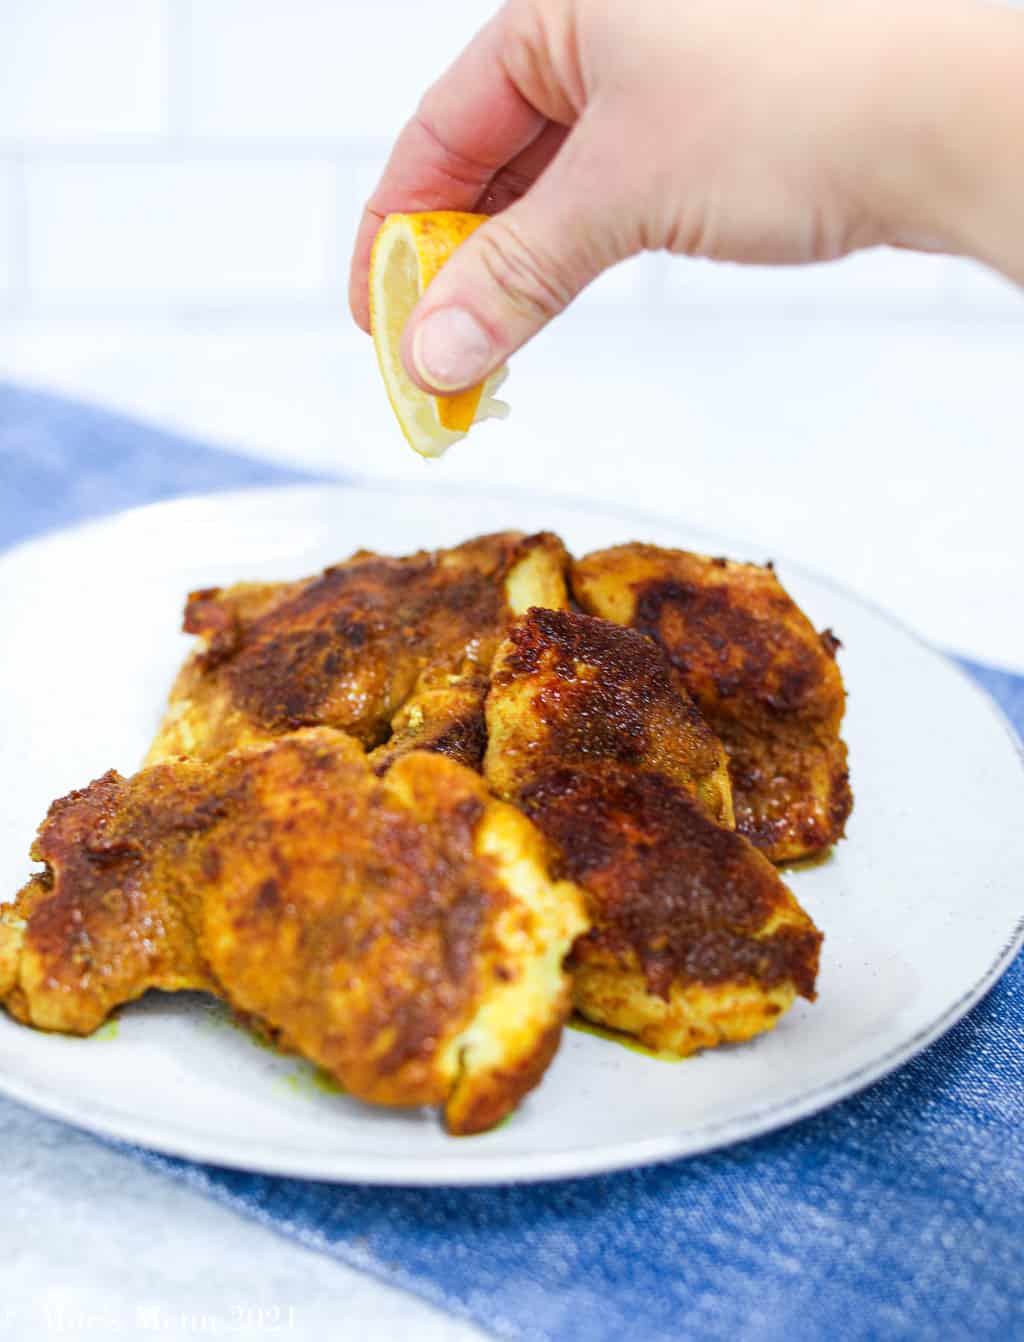 A small plate of turmeric rubbed chicken with a hand squeezing lemon juice over it